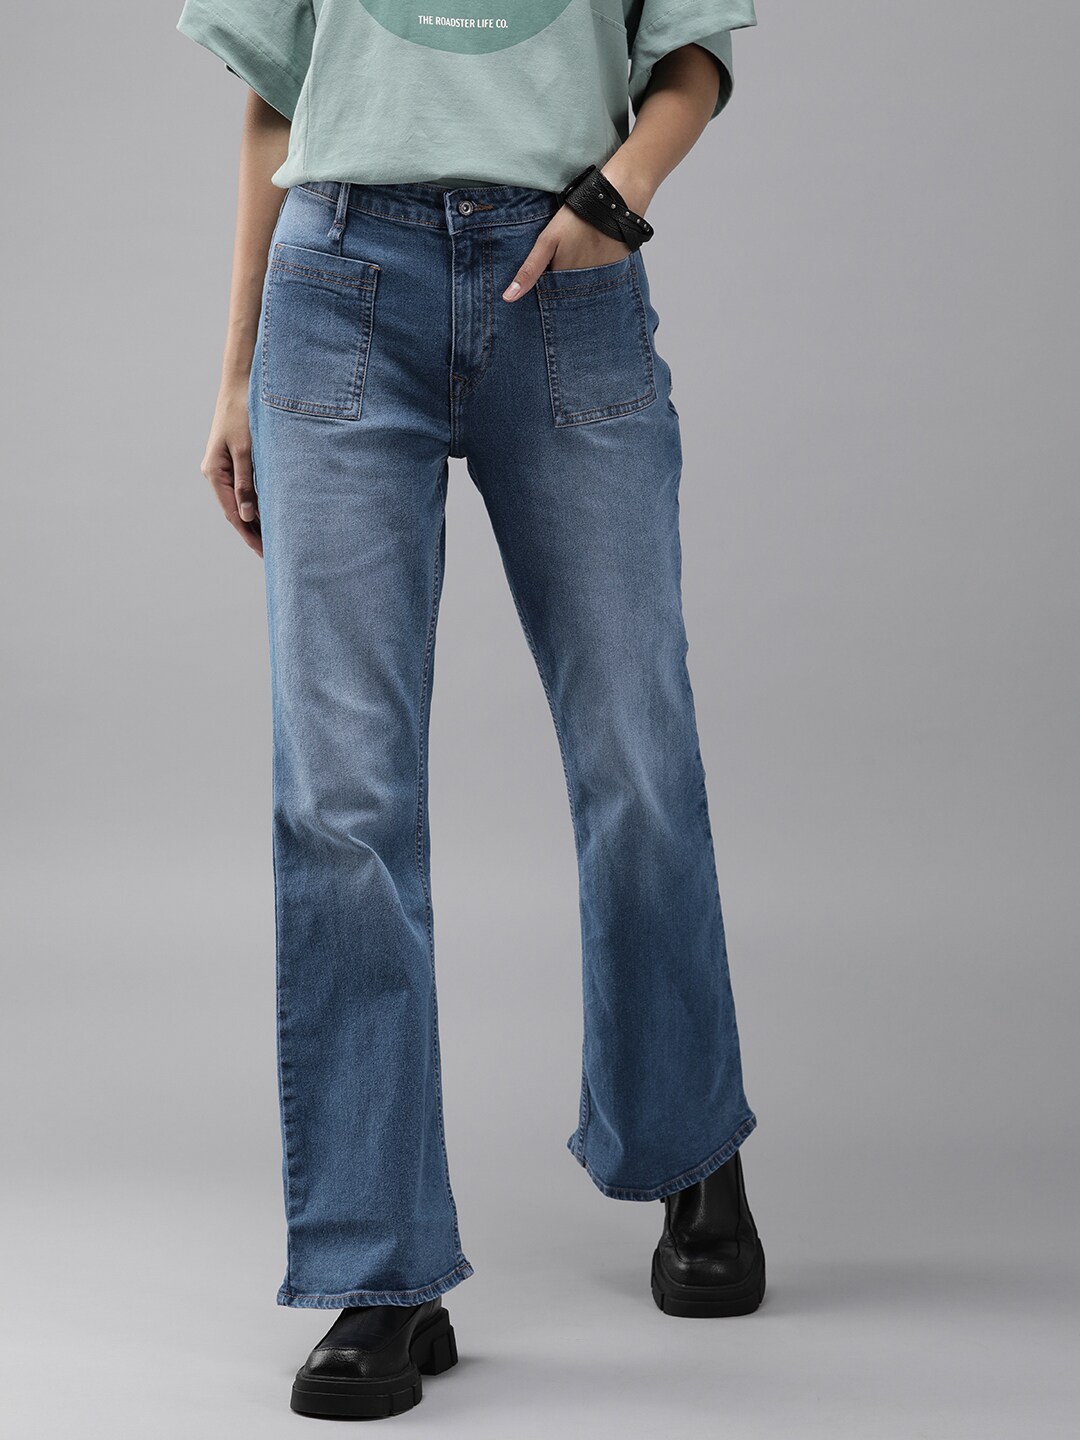 The Roadster Lifestyle Co Women Blue Flared High-Rise Heavy Fade Stretchable Jeans Price in India